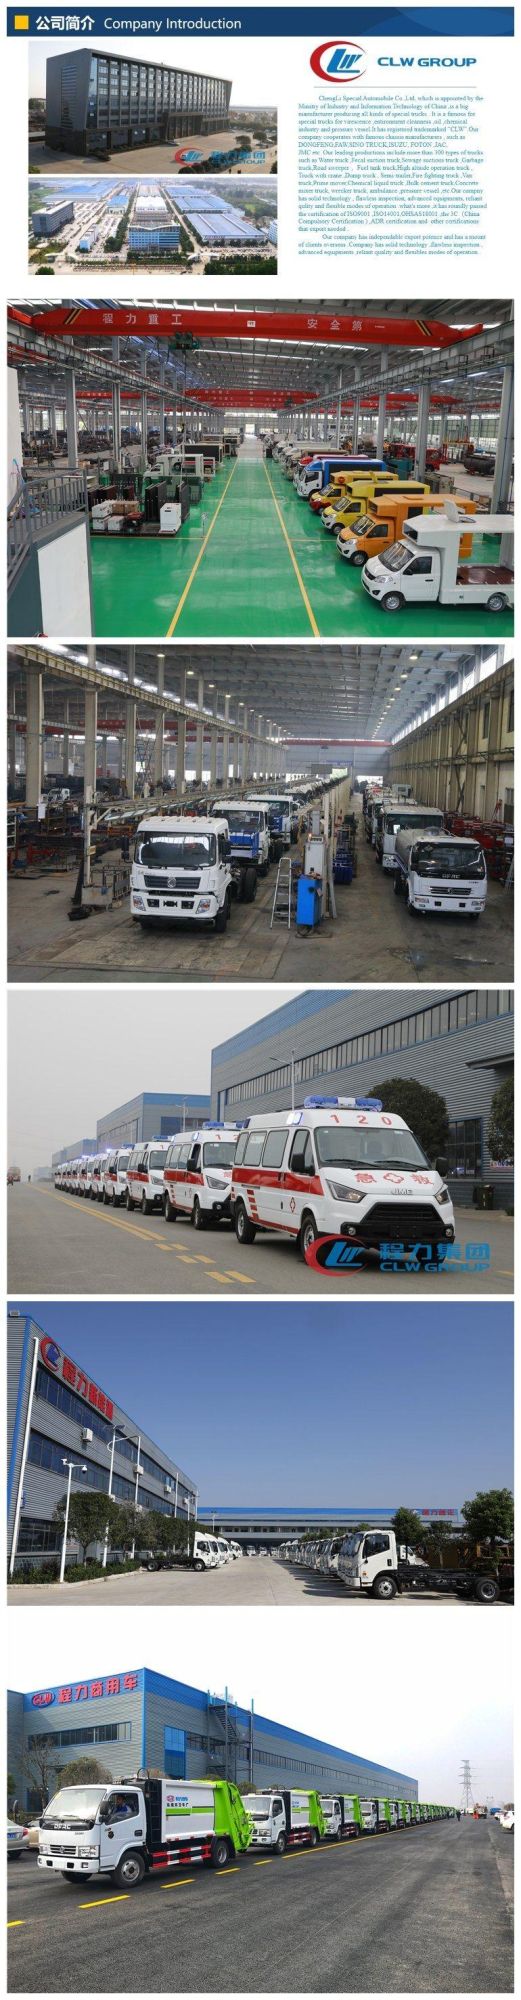 Dongfeng 12, 000 Liters Water Tank Fire Fighting Truck / Fire Truck for Sale